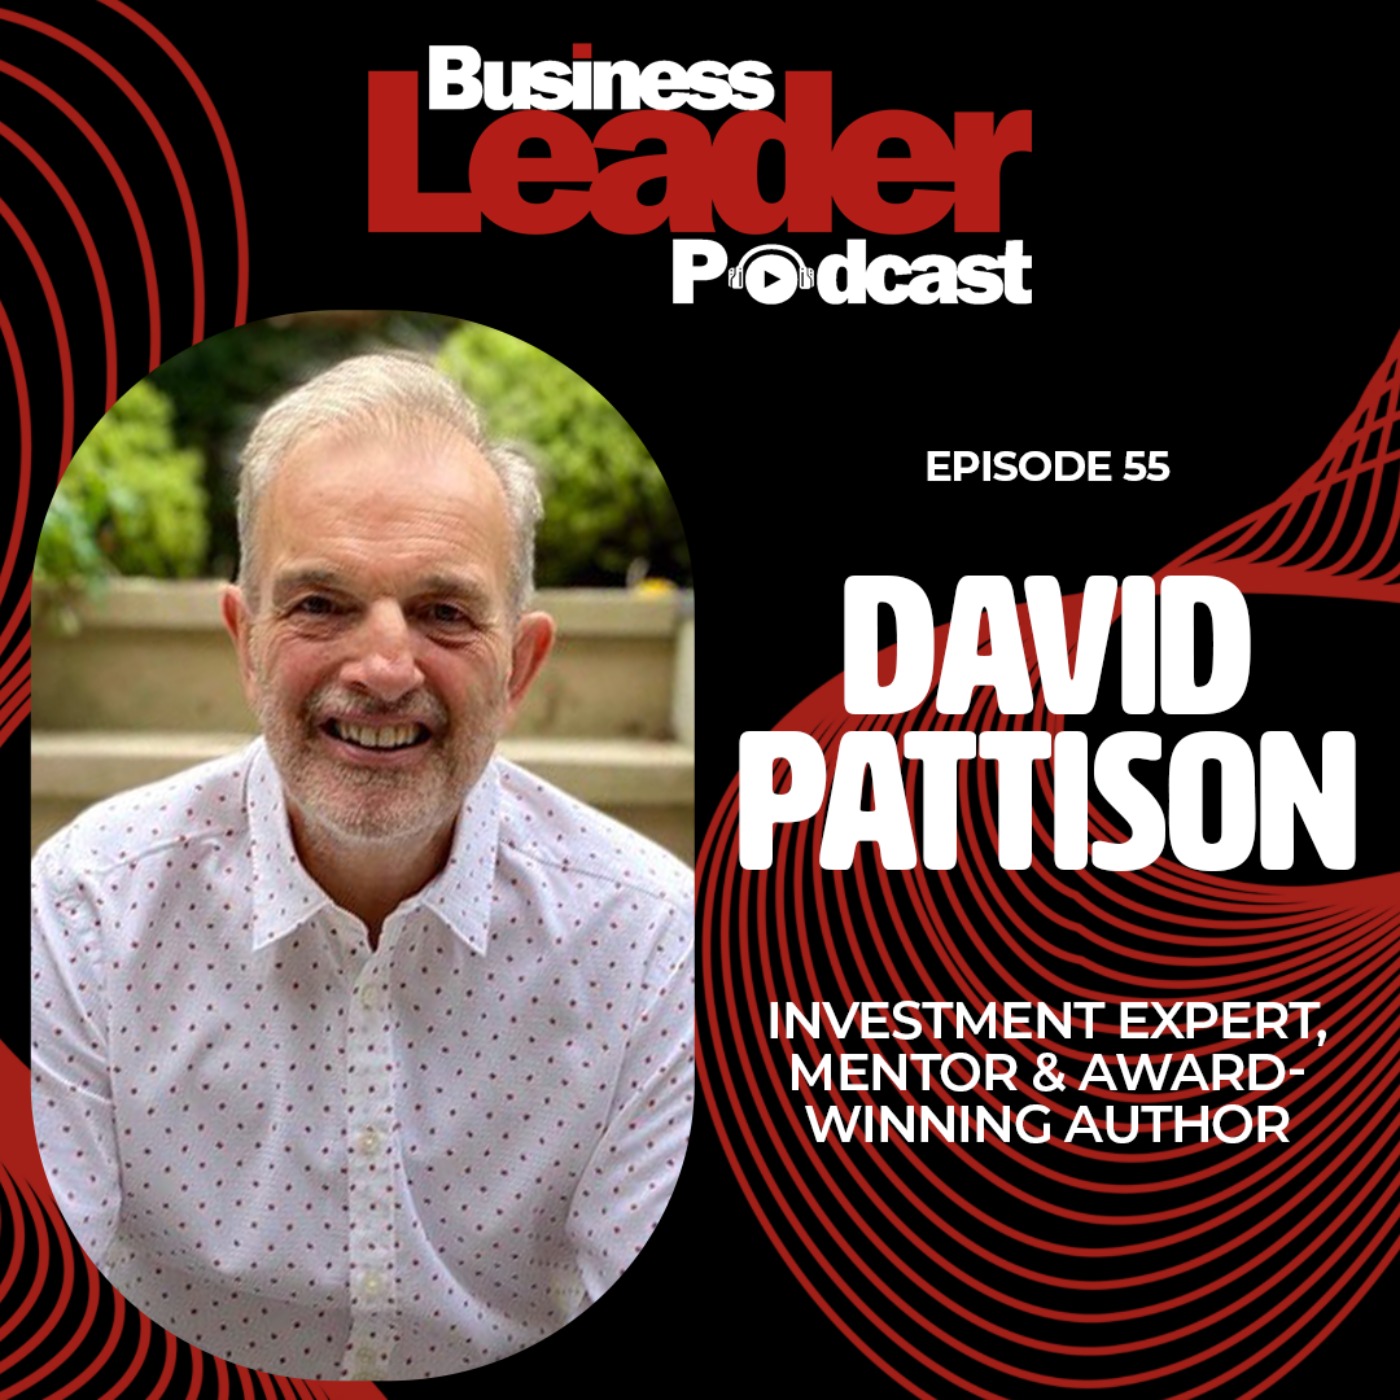 David Pattison: Funding fundamentals and mixing art & science in business